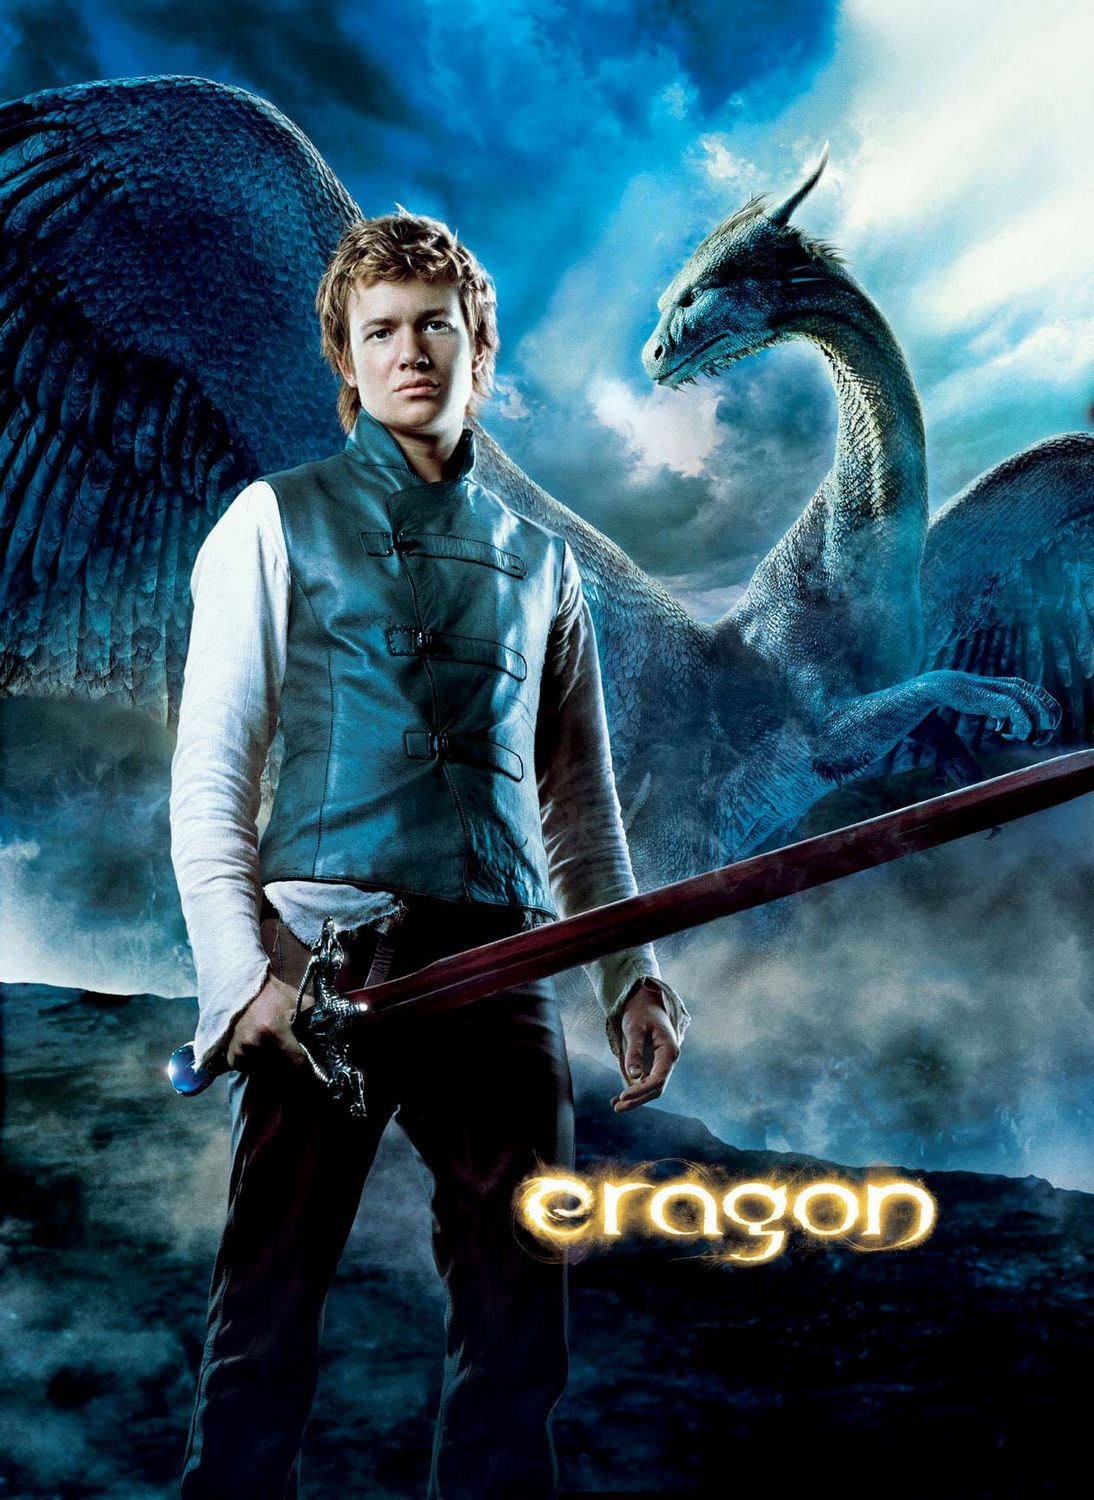 Extra Large Movie Poster Image for Eragon (#11 of 11)